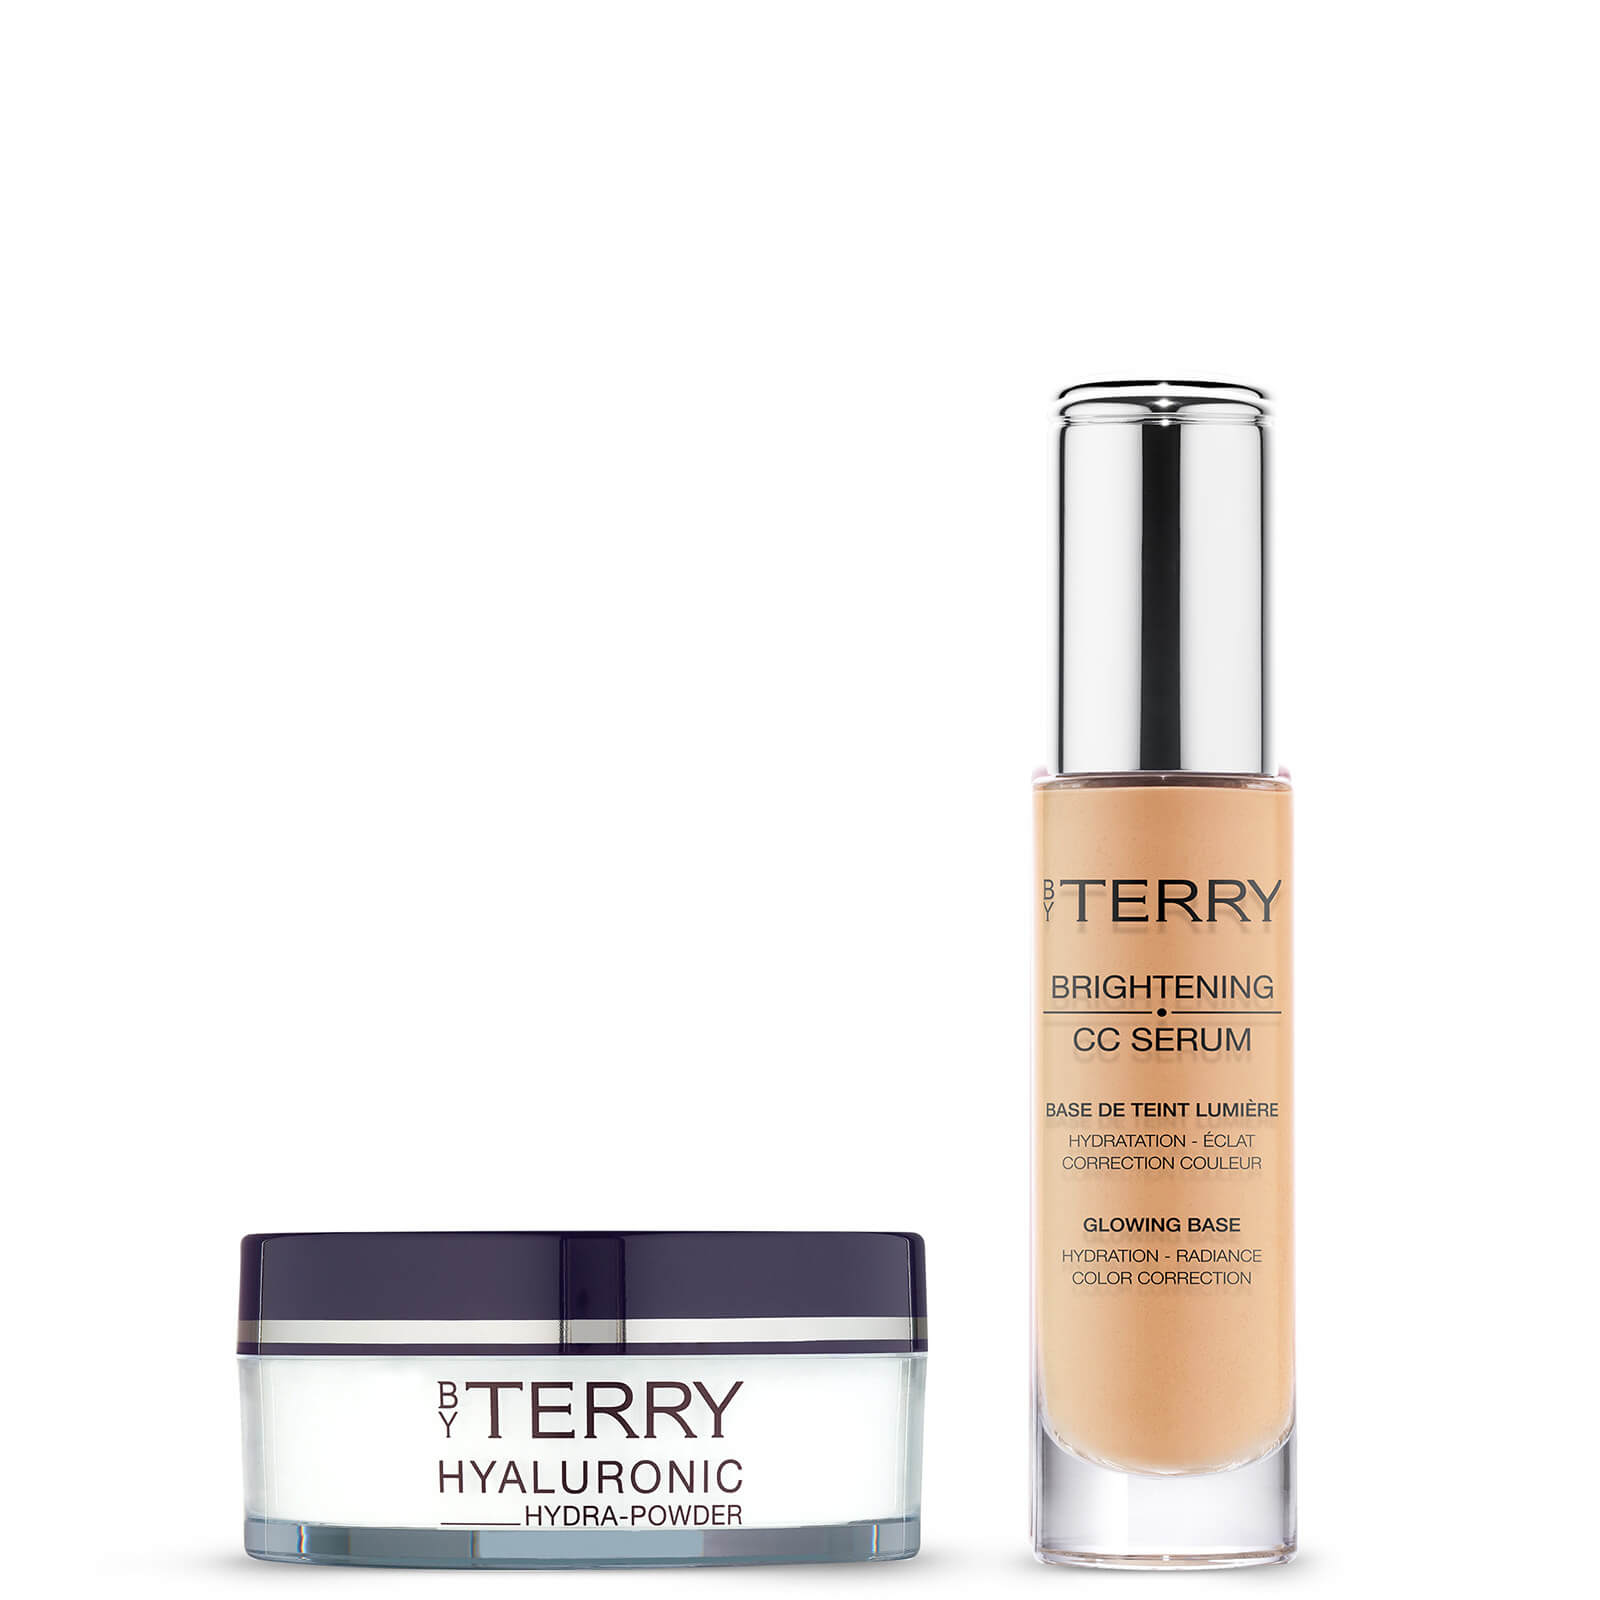 By Terry Hyaluronic Hydra-Powder and Cellularose CC Serum - No.3 Apricot Glow Bundle